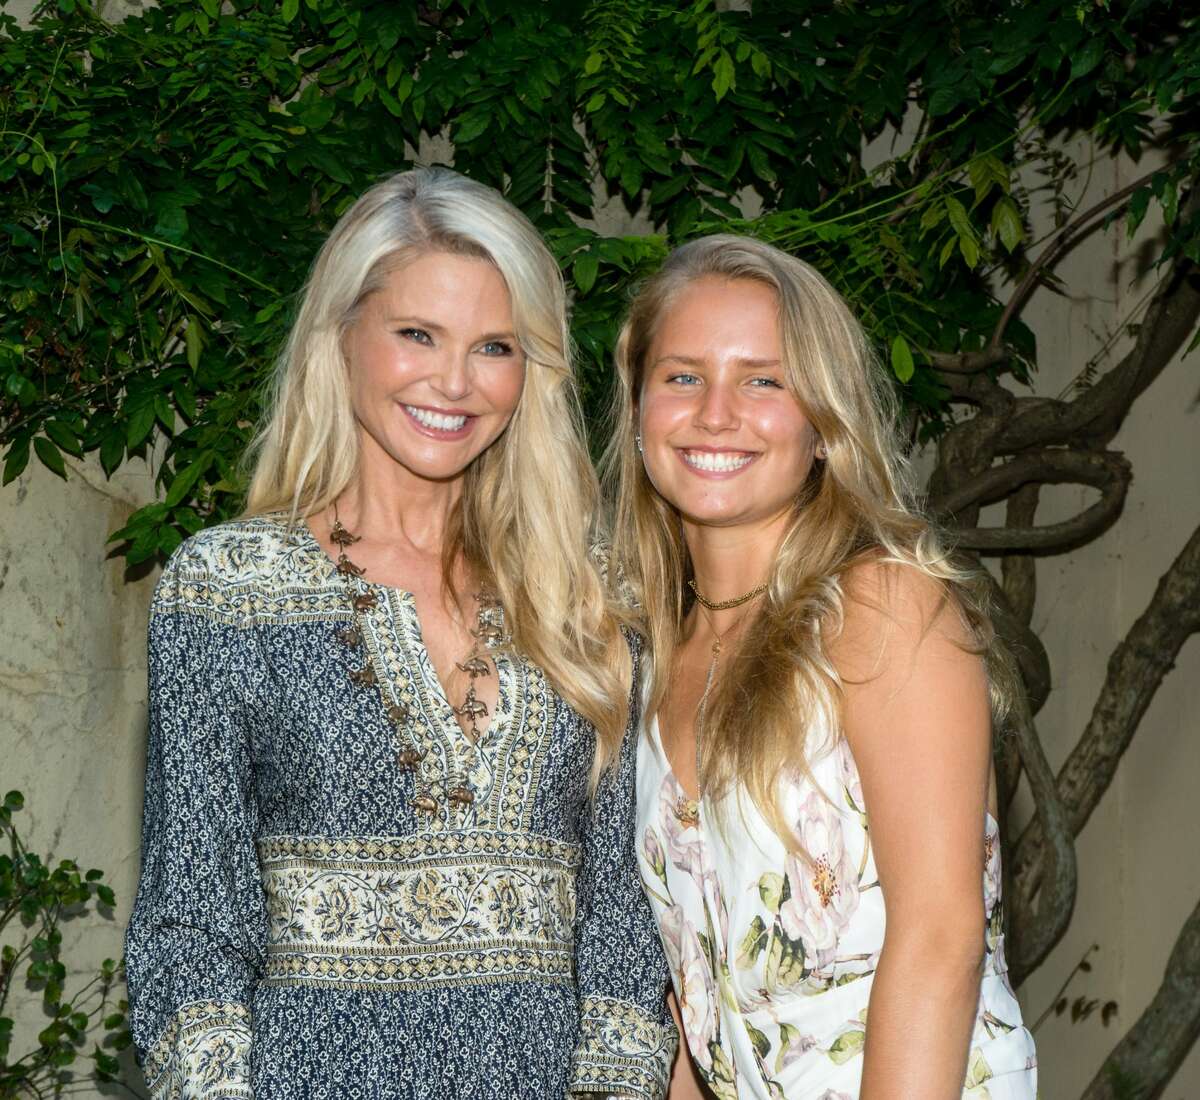 Christie Brinkley's daughter Sailor Brinkley Cook looks just like her and is starting to make a name for herself as a model.